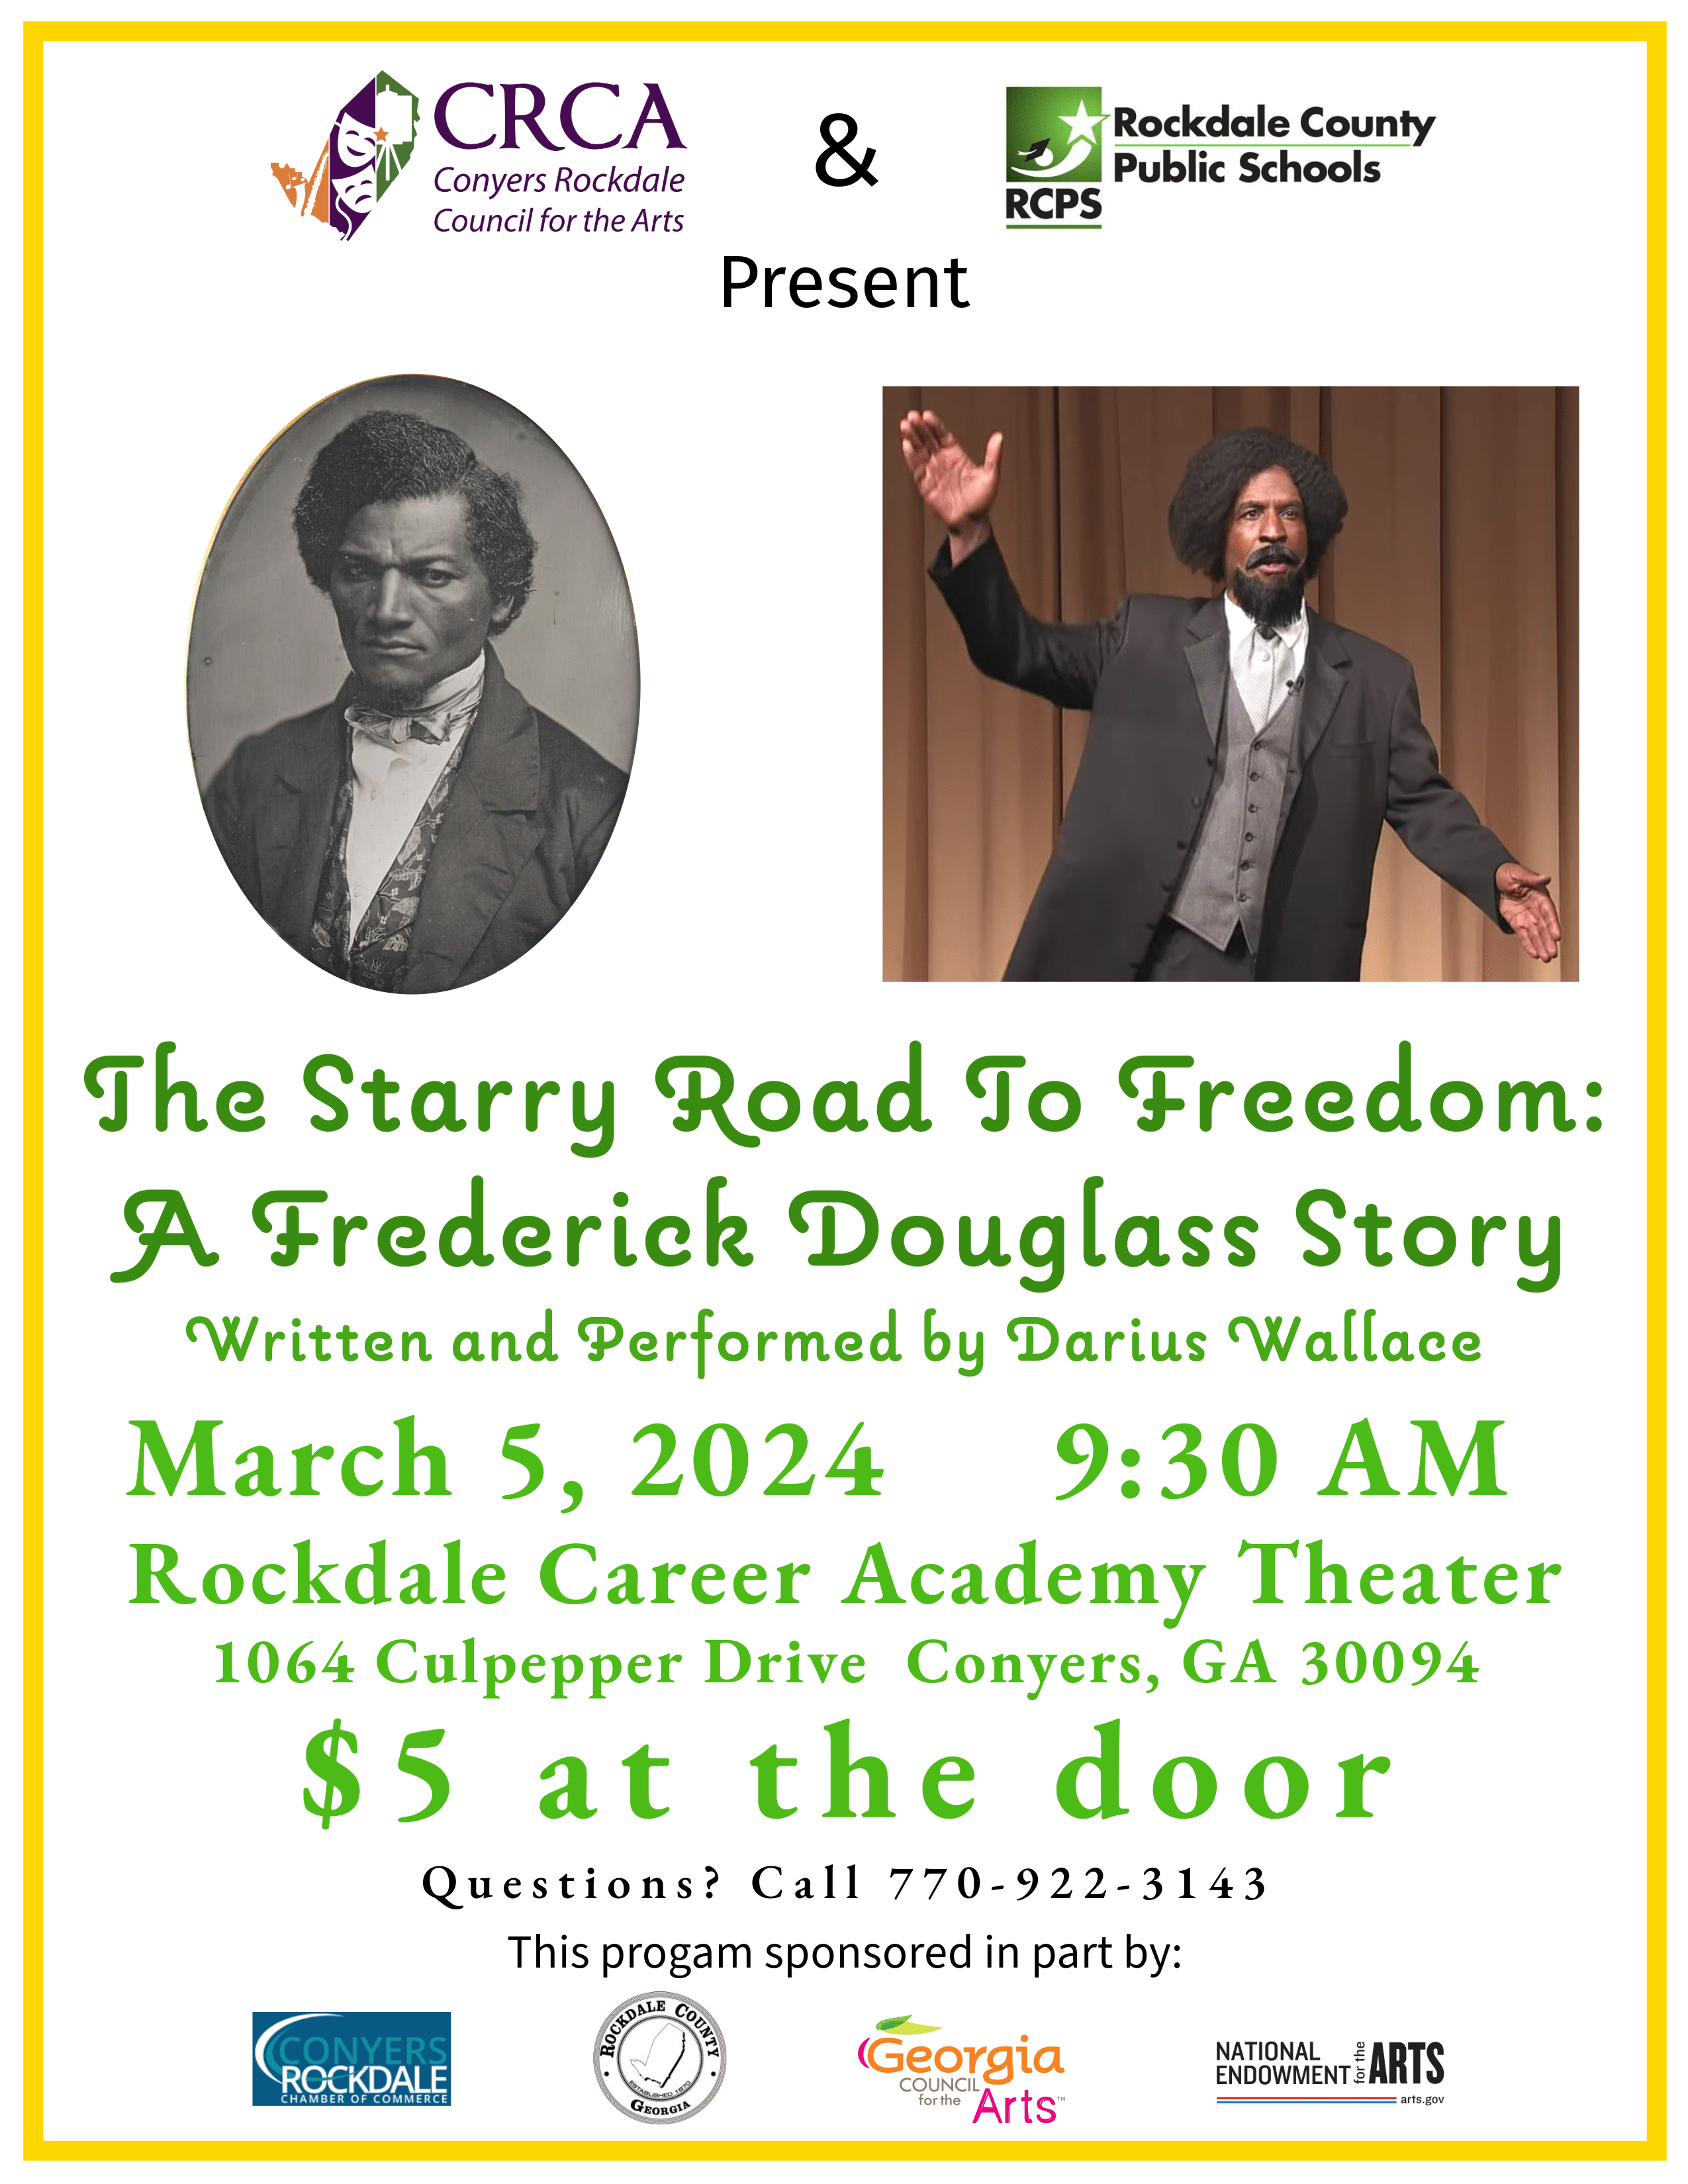 The Starry Road To Freedom: A Frederick Douglass Story Flyer